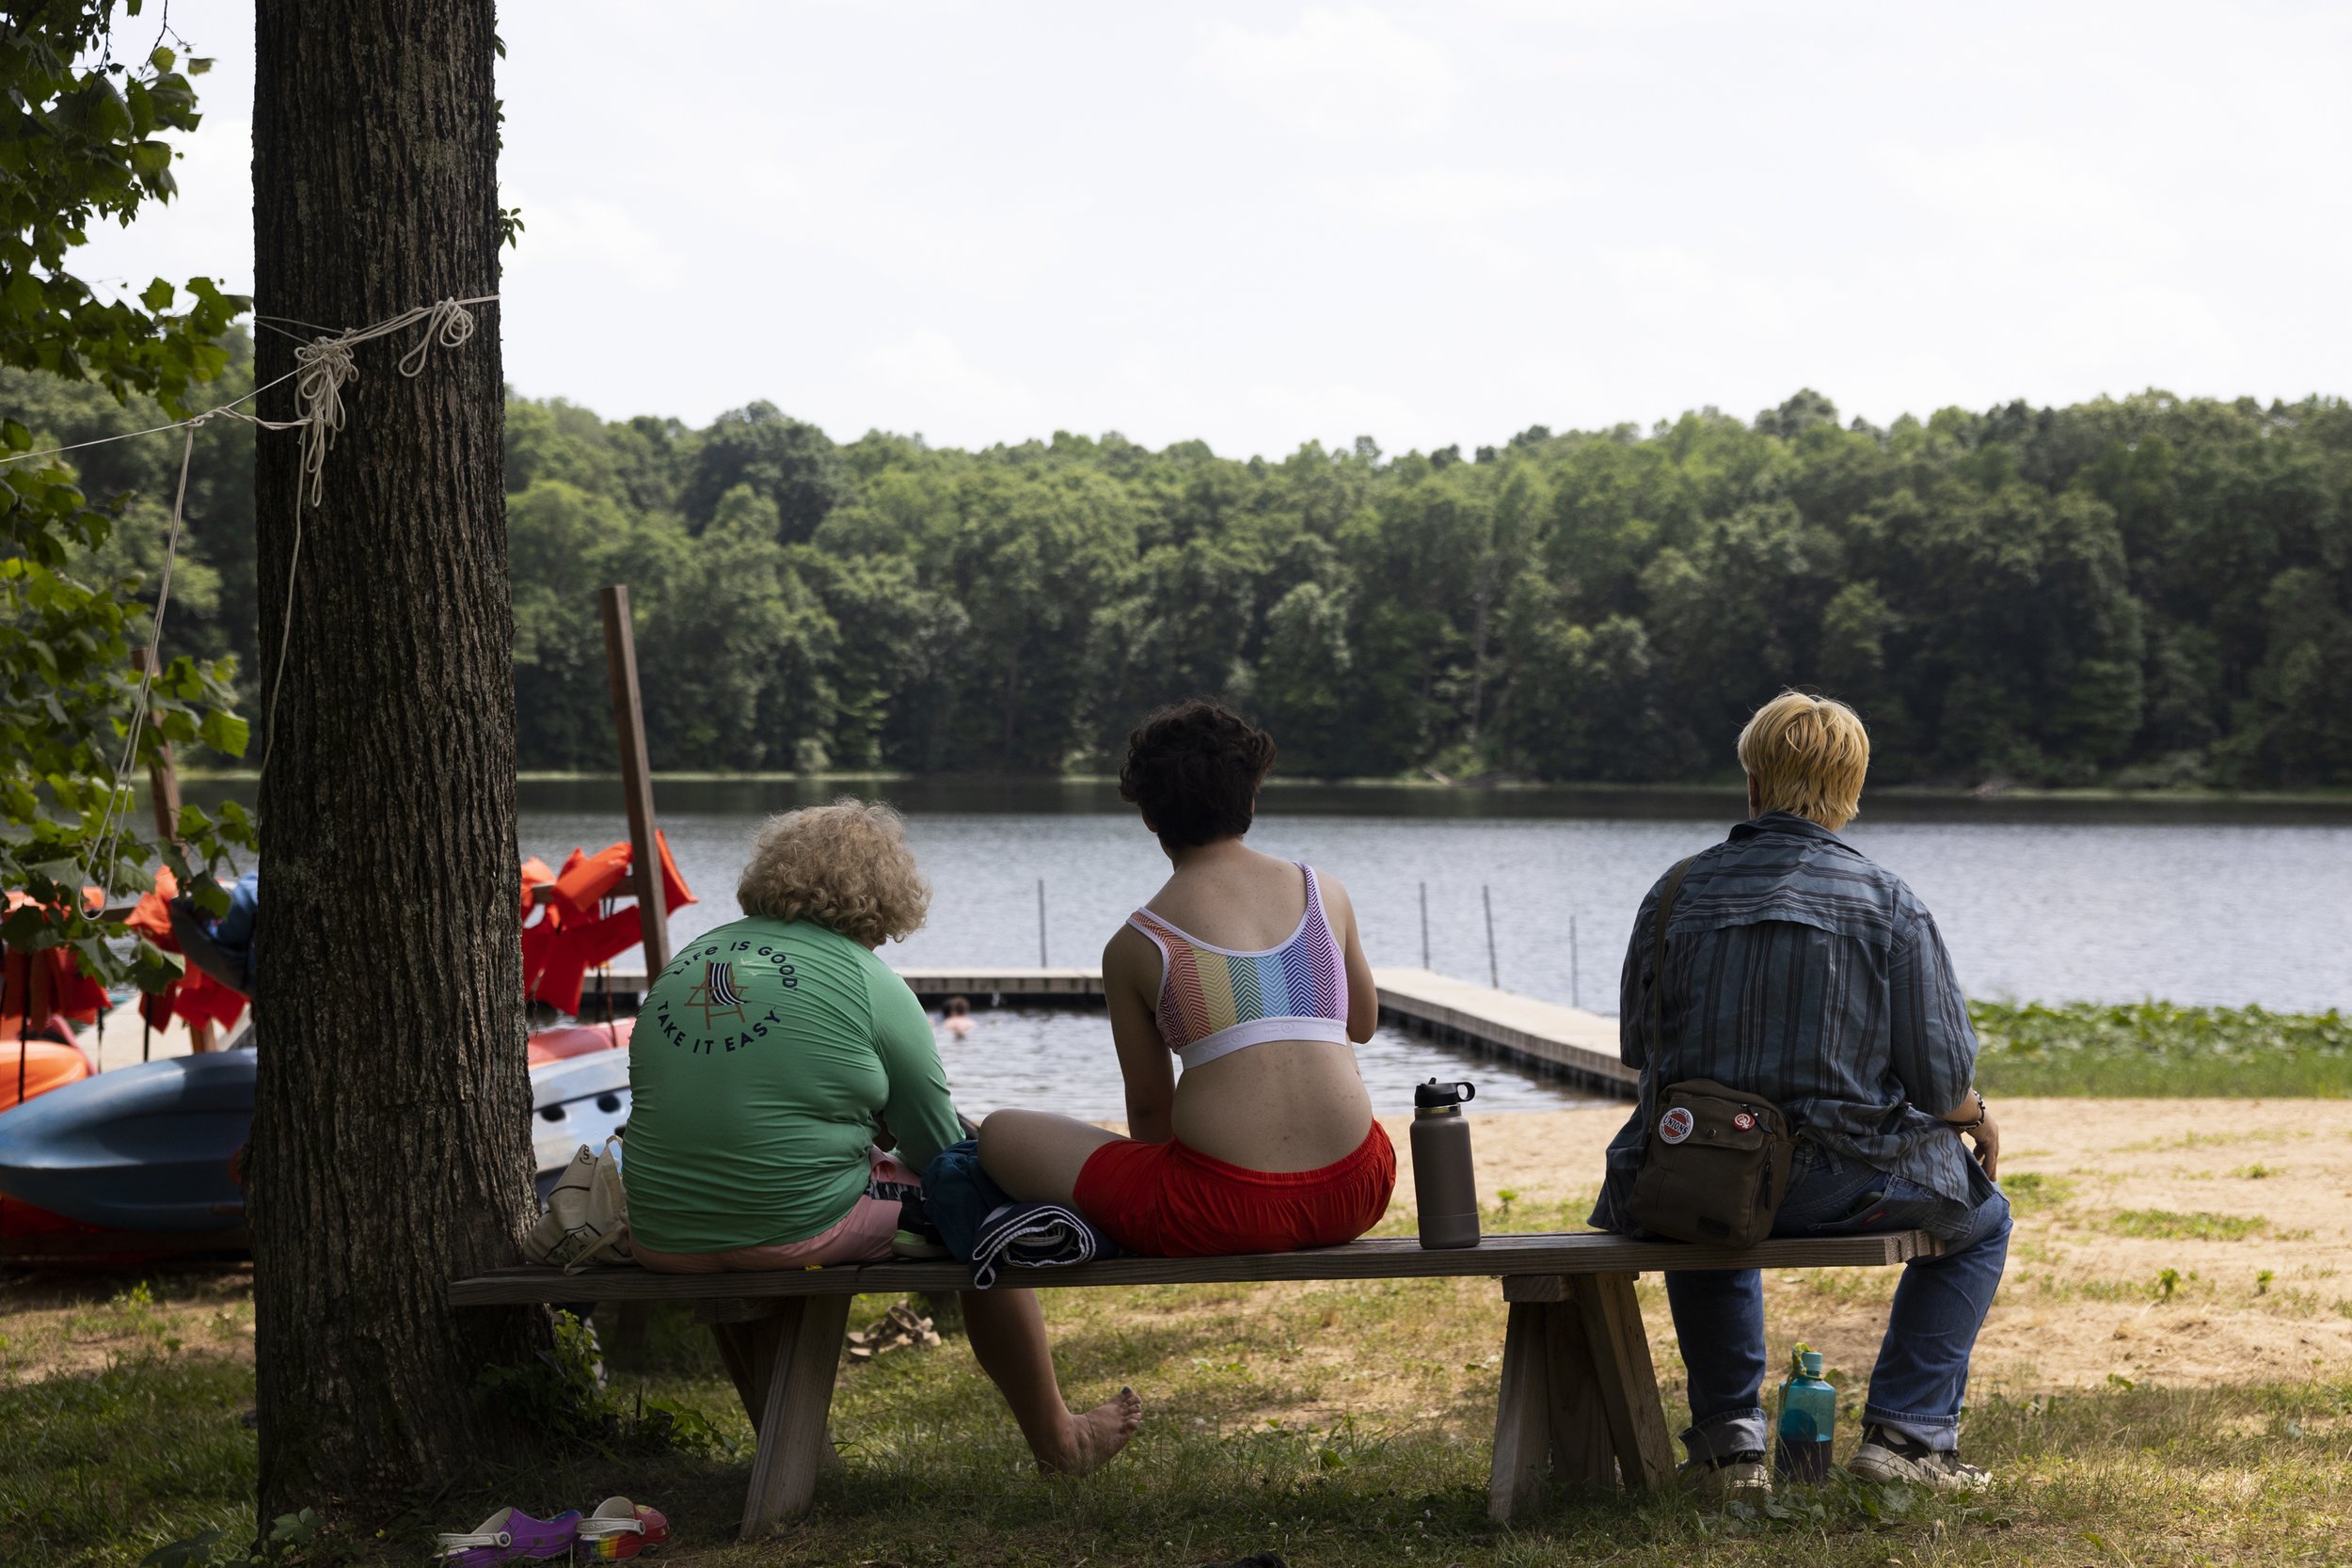  Campers (from left) Oliver (he/him), Avram (he/him) and Fern (he/him) sit beside the lake. 